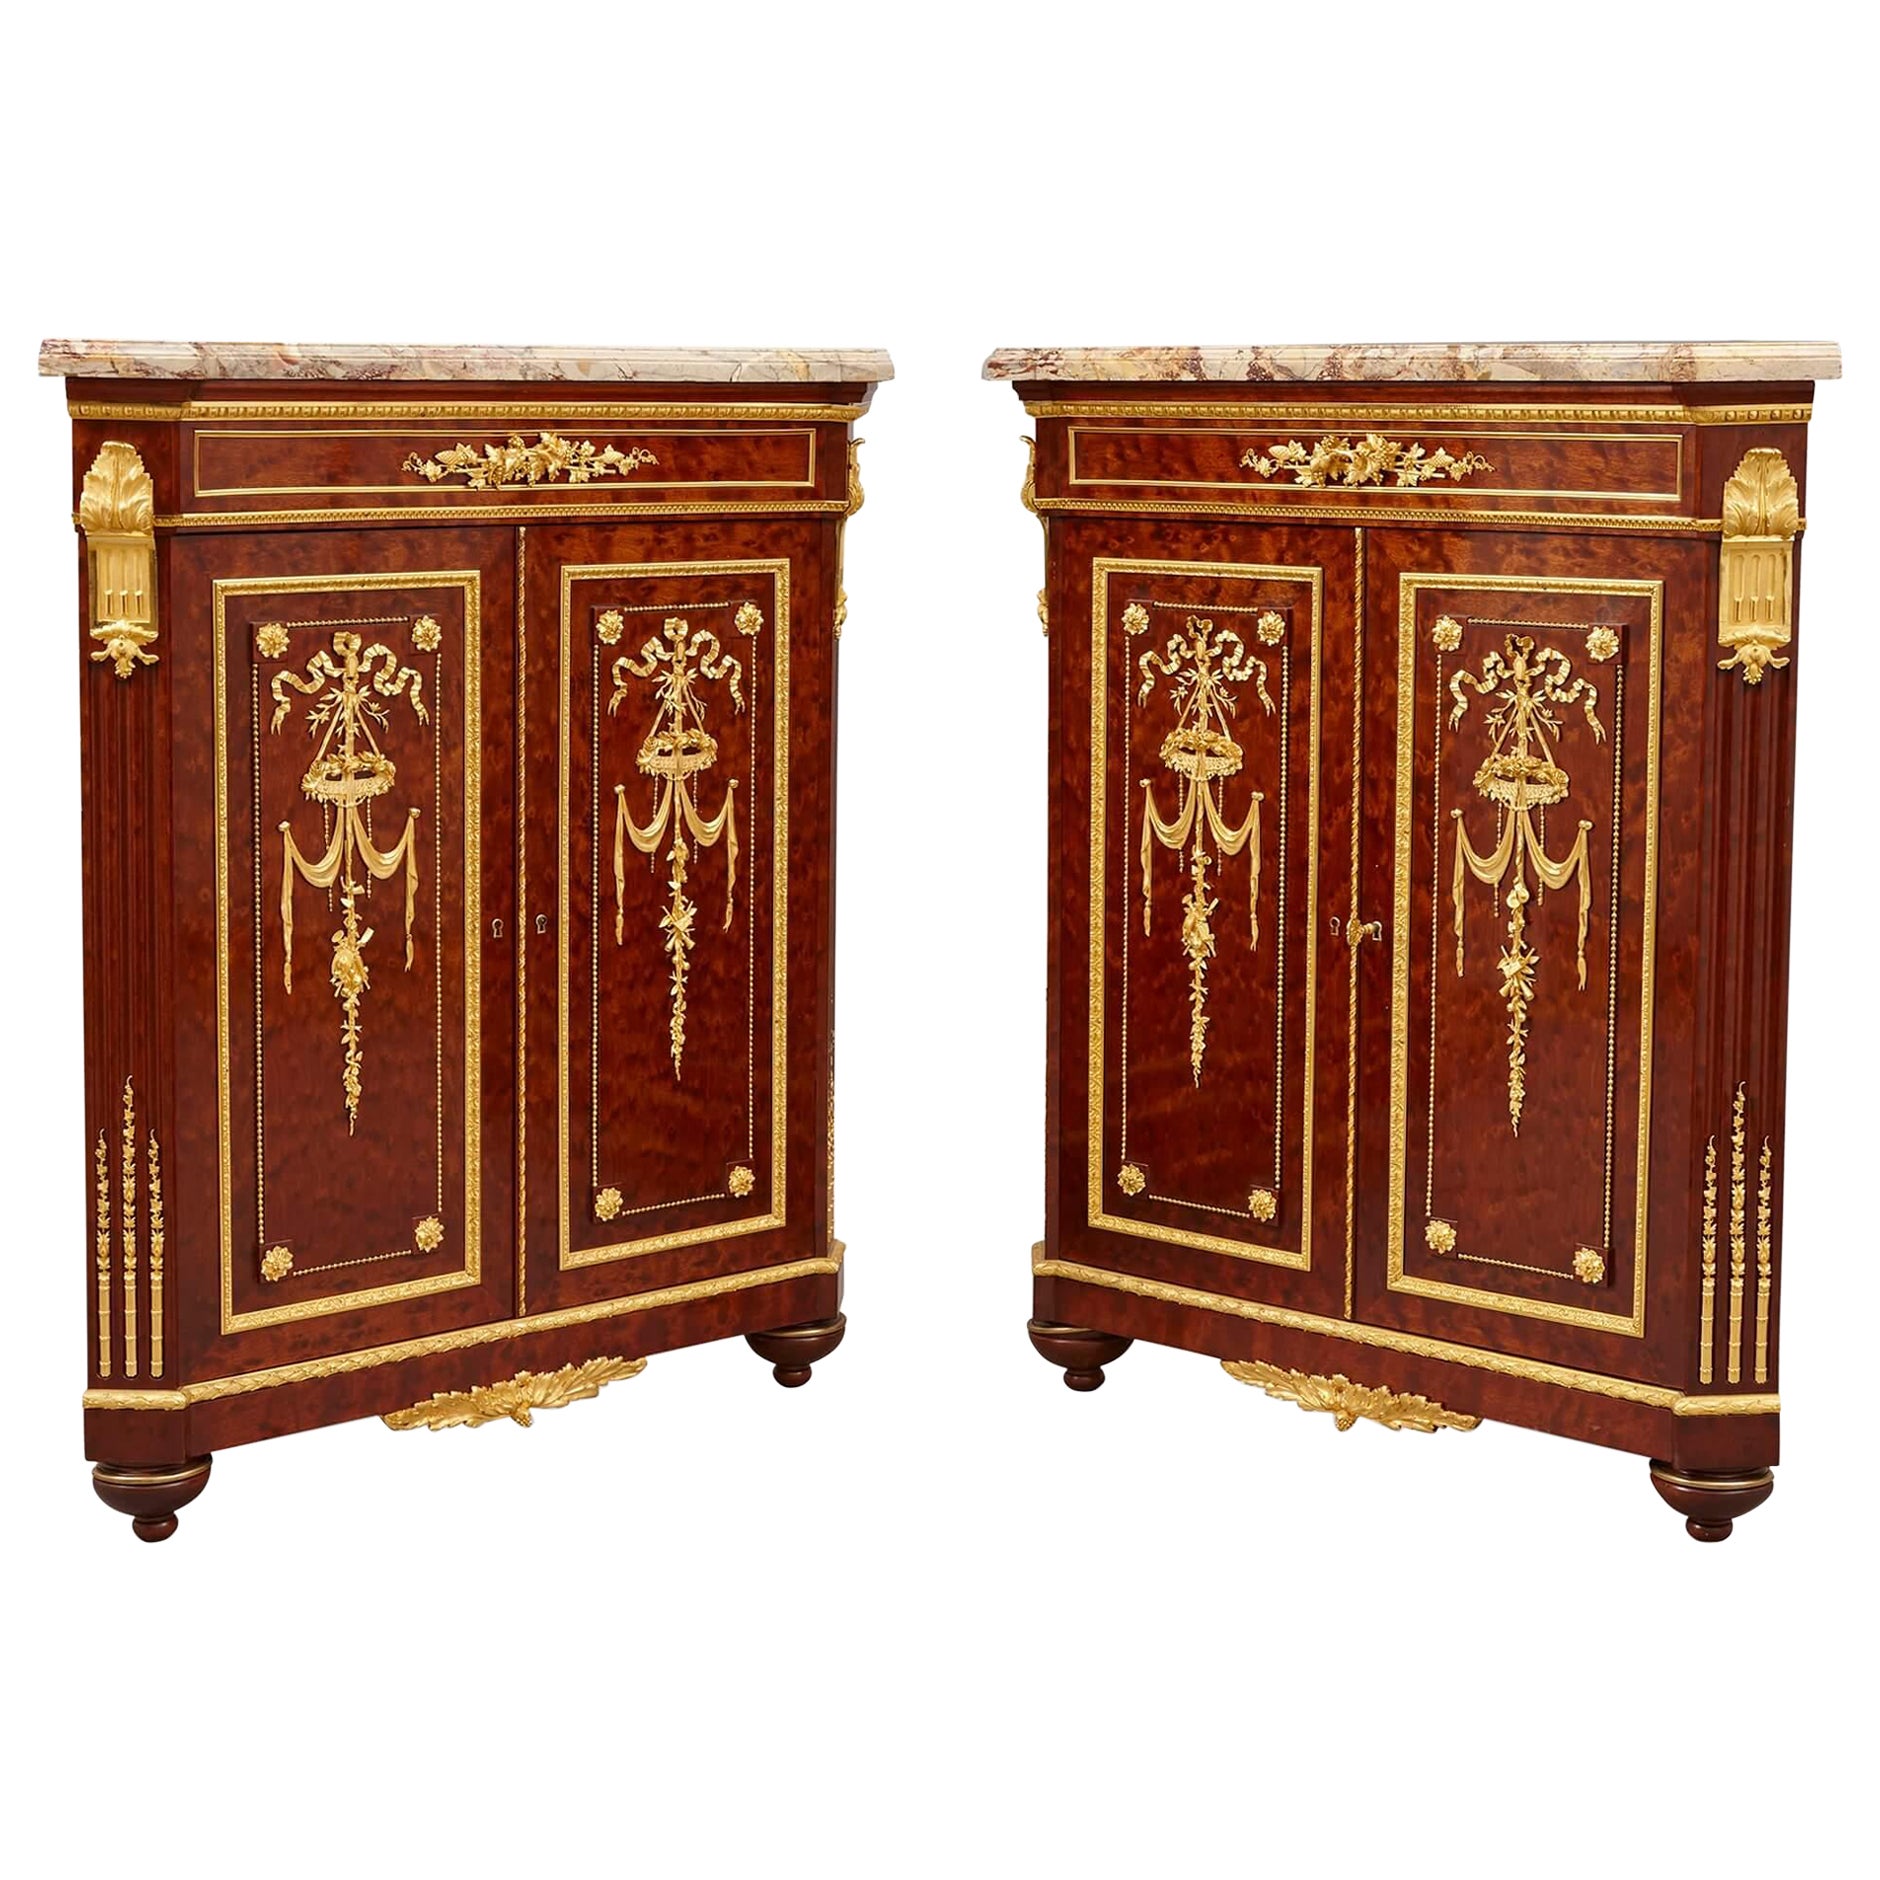 Pair of Antique Ormolu Mounted and Mahogany Corner Cabinets by Grohé Frères For Sale